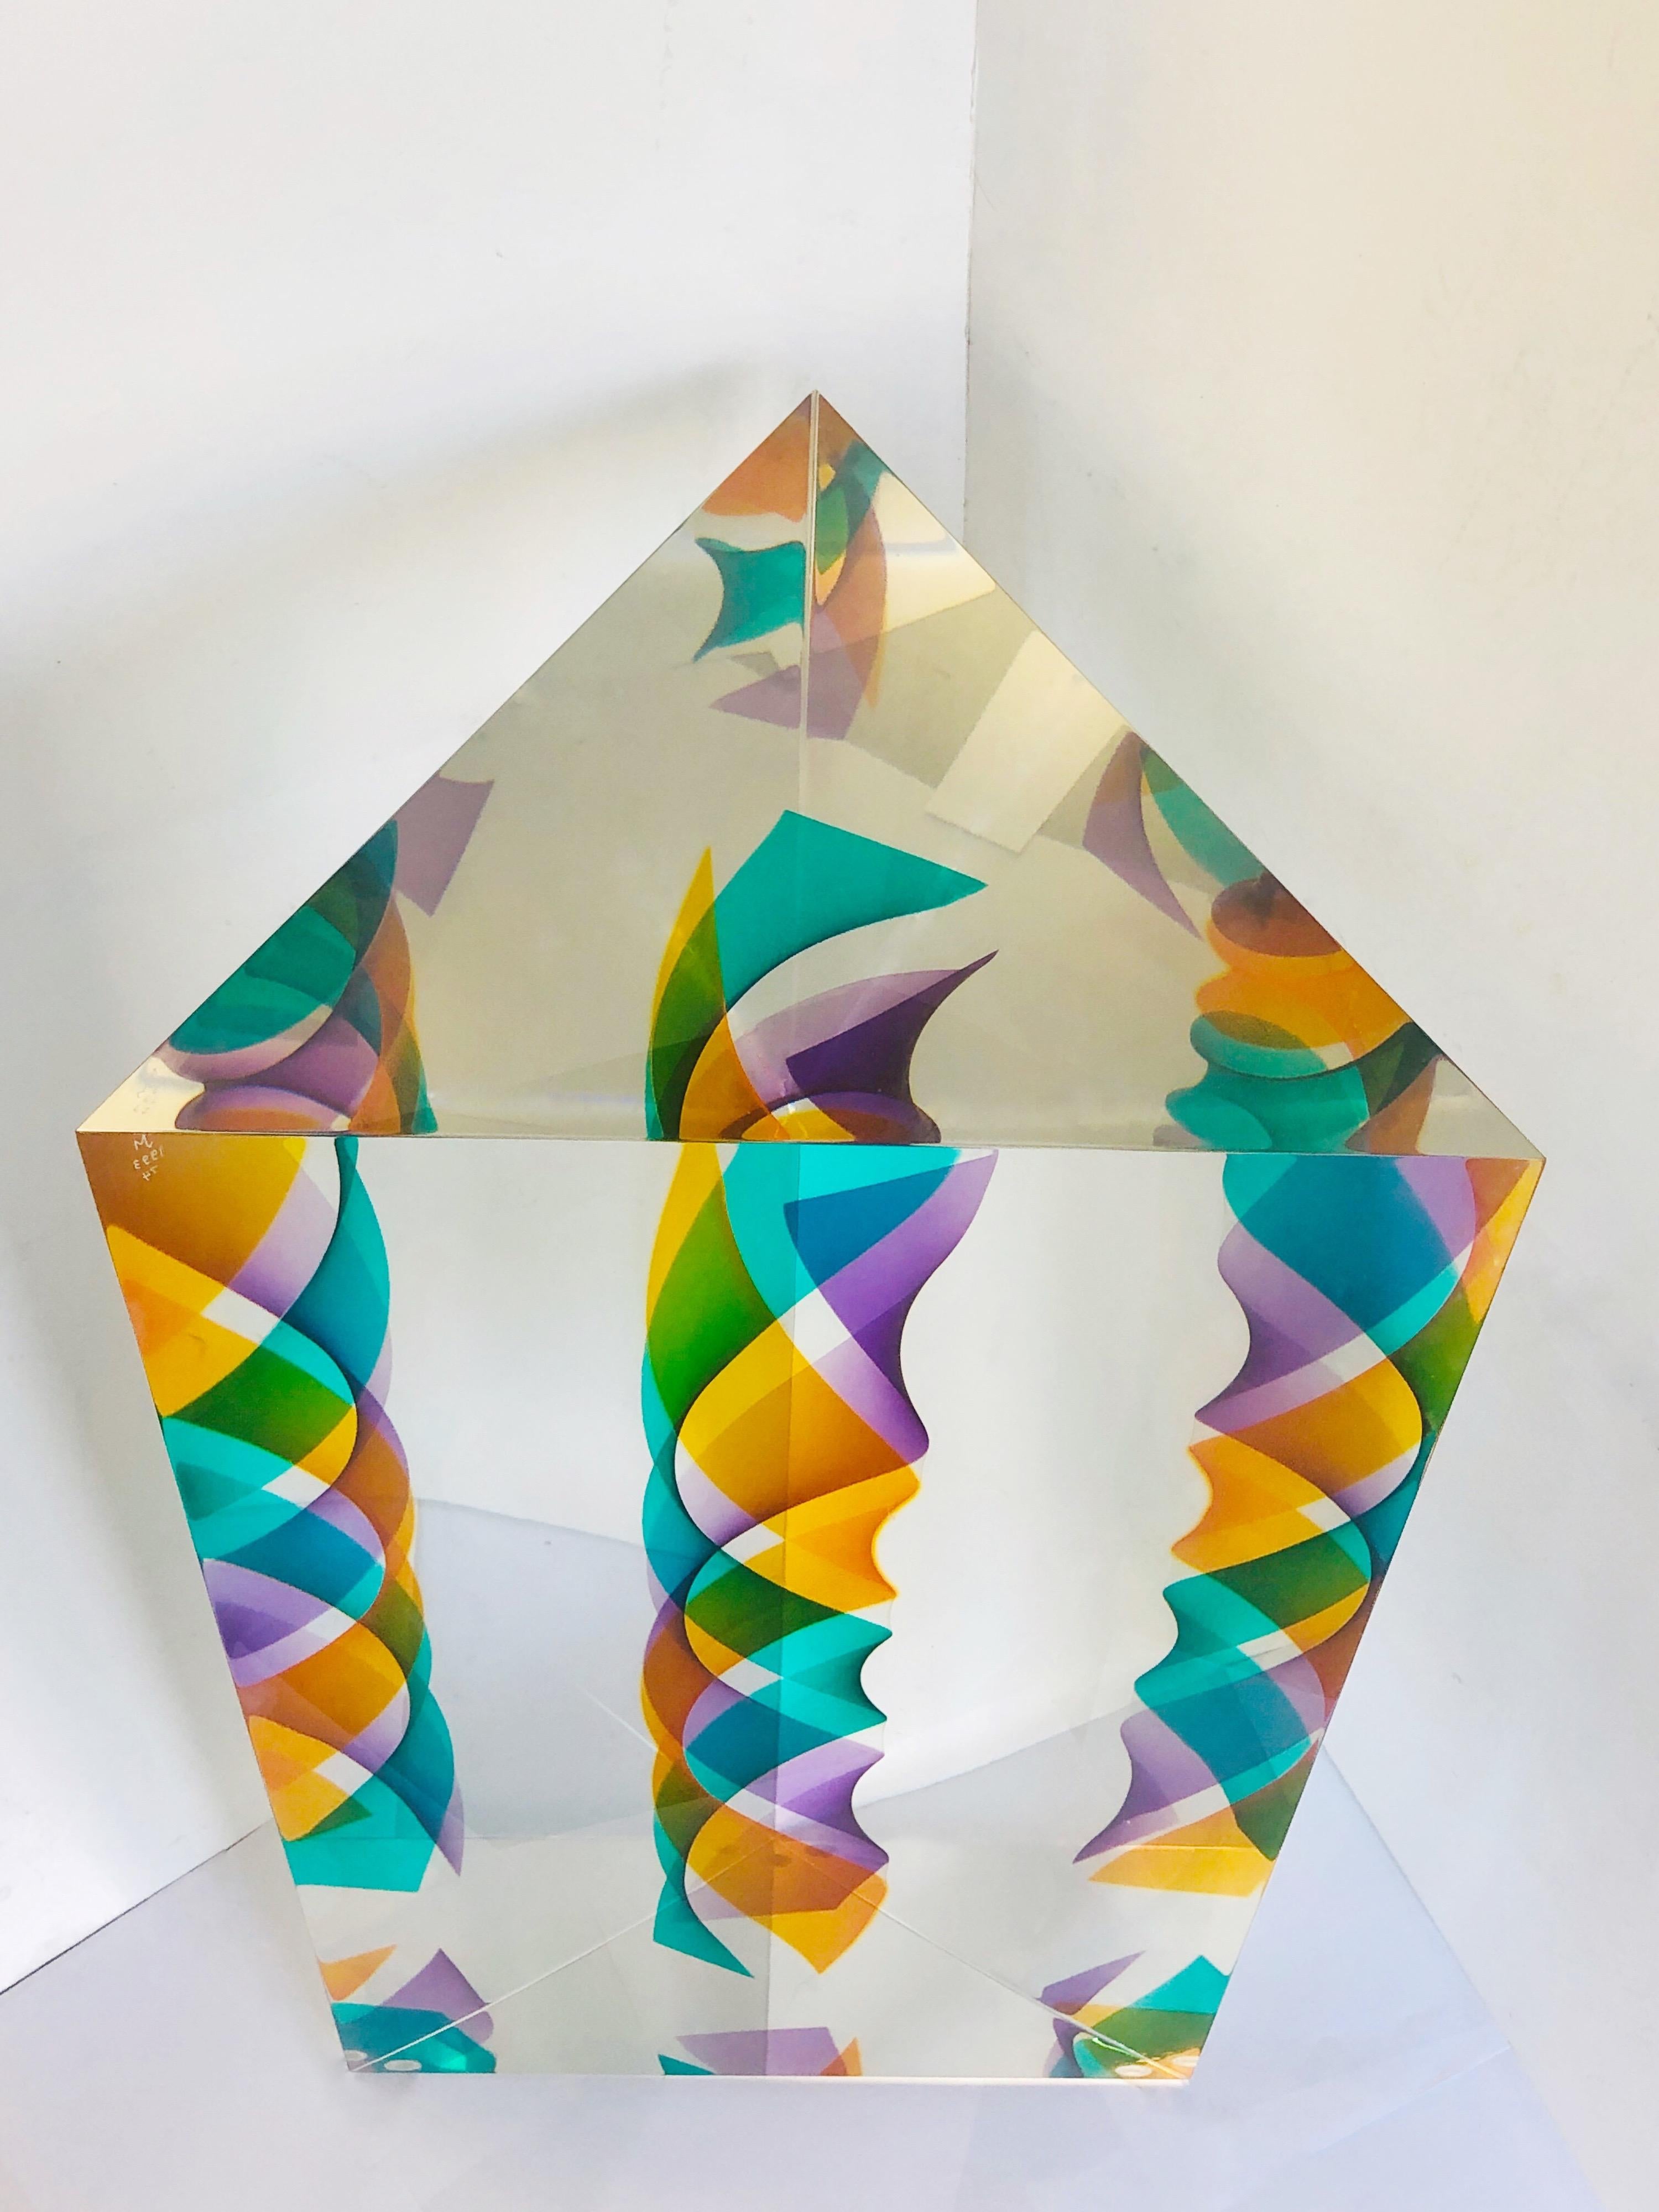 A monumental Lucite sculpture by Norman Mercer. A solid Op Art monolithic triangular sculpture. There is a colorful spiral at the center that appears to multiply when seen from different angles. Each side is 16.5